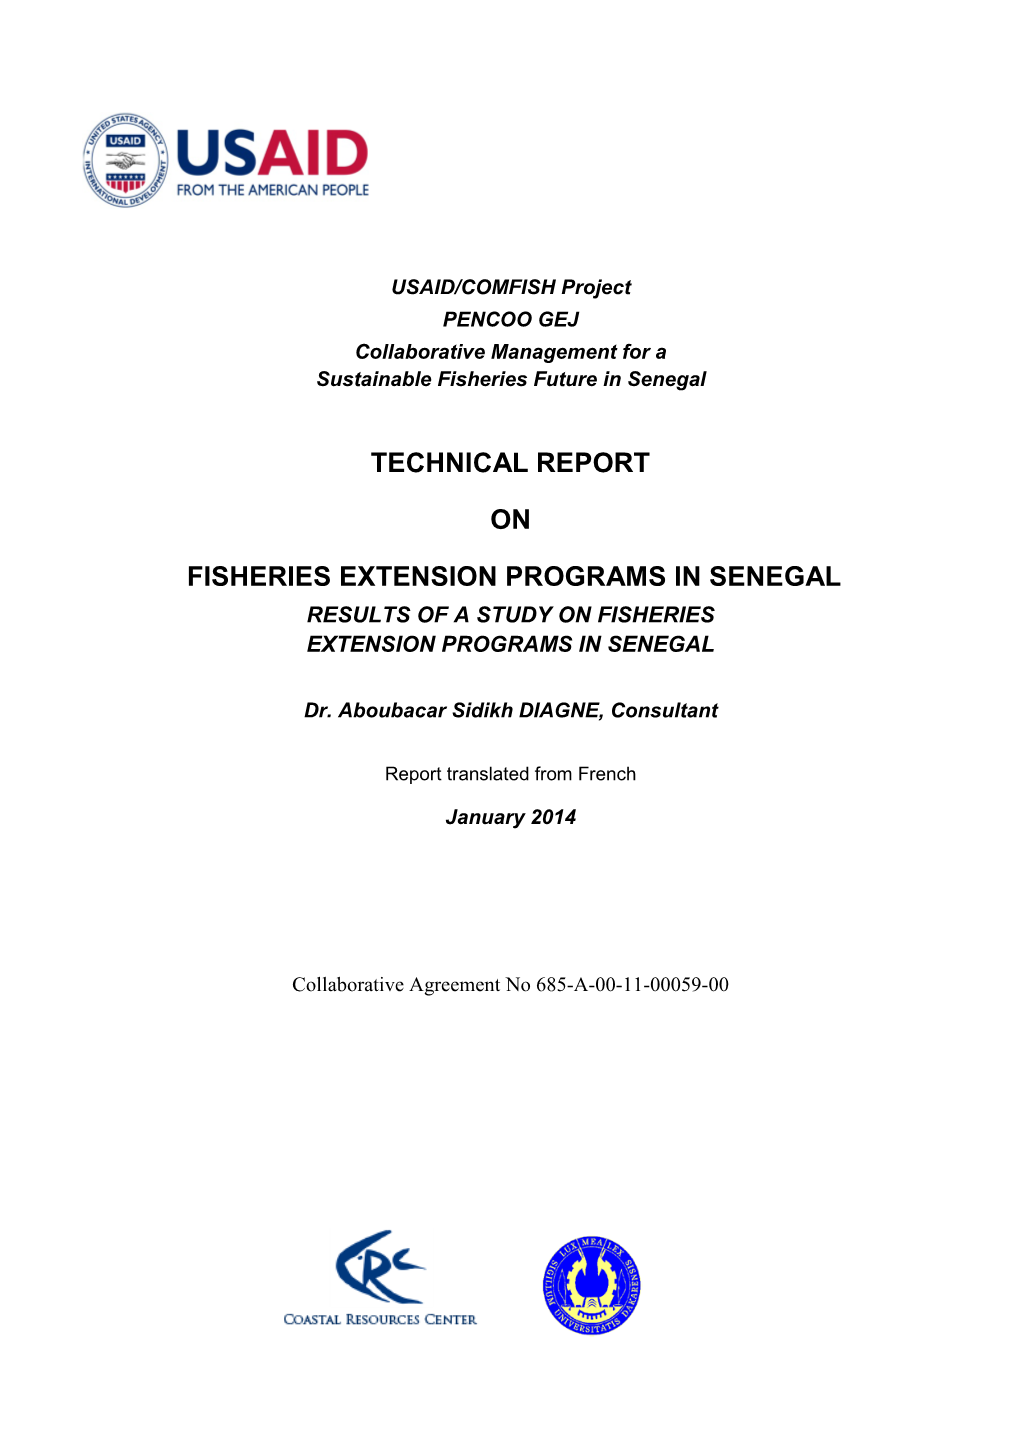 USAID/COMFISH: Technical Report on Fisheries Extension Programs In